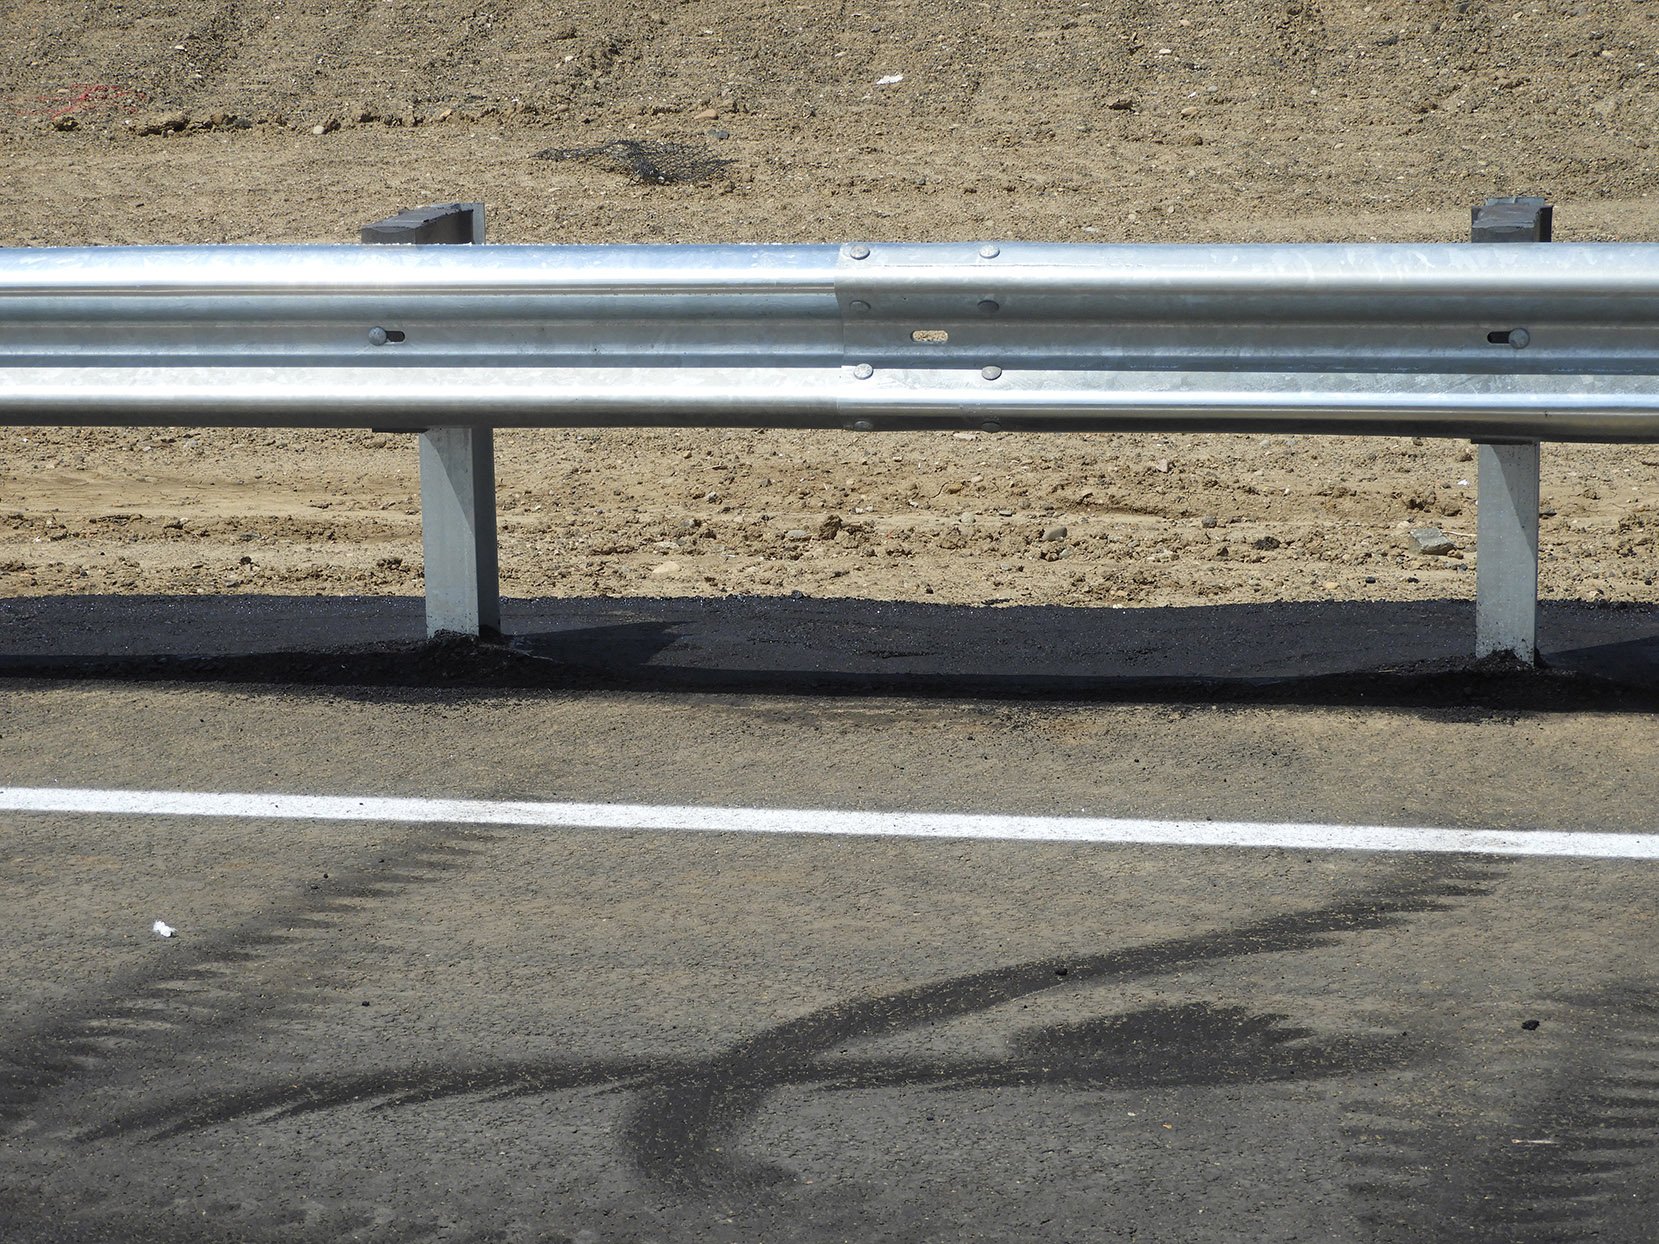 Asphalt around guardrail posts, south of 144th Avenue on the west side of southbound I-25